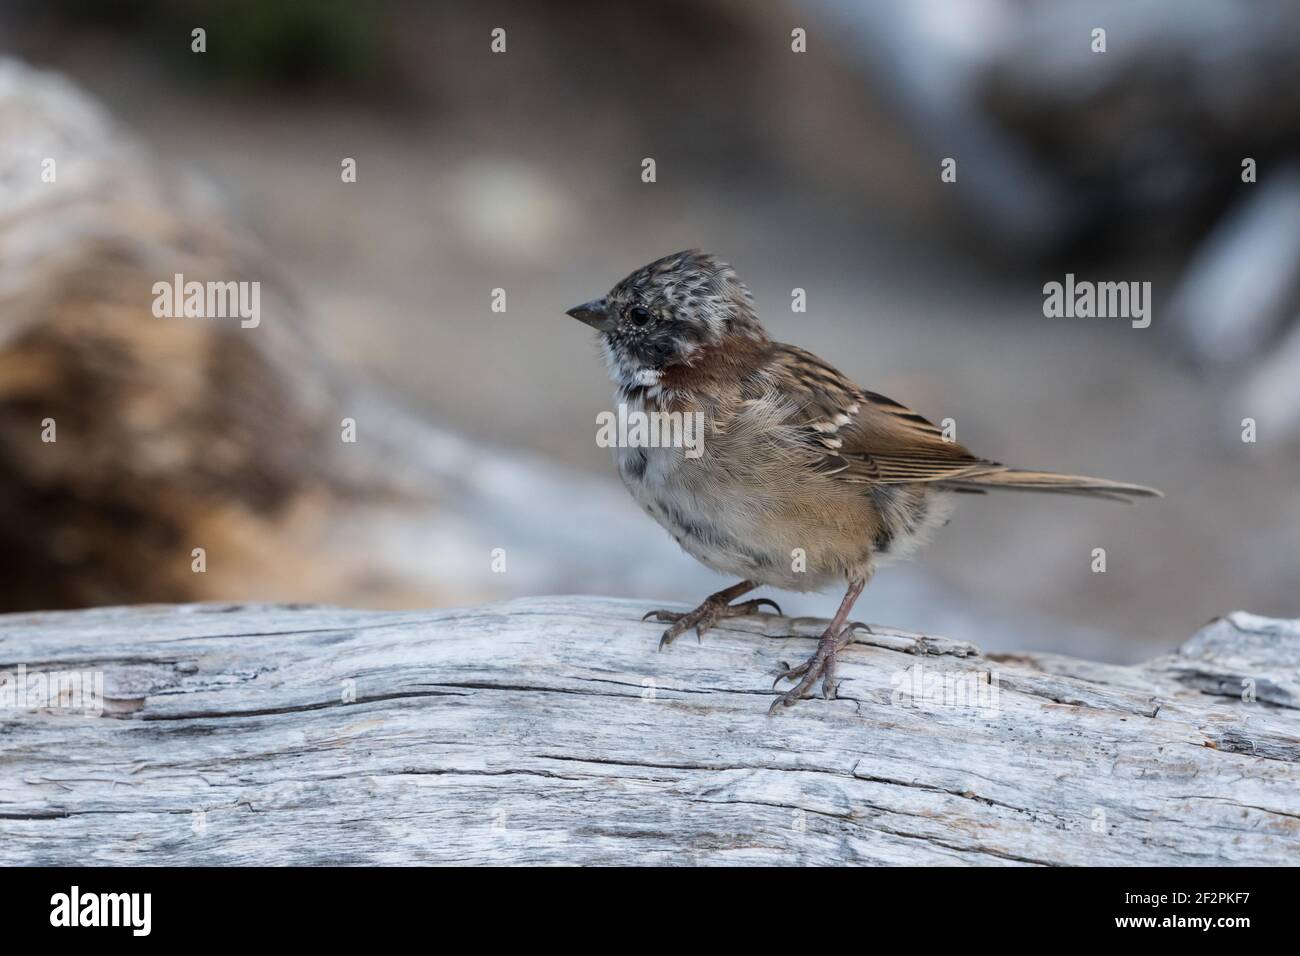 The Patagonian Rufous-collared Sparrow or Andean sparrow, Zonotrichia capensis australis, is found near the tip of South America.  Common in both Los Stock Photo